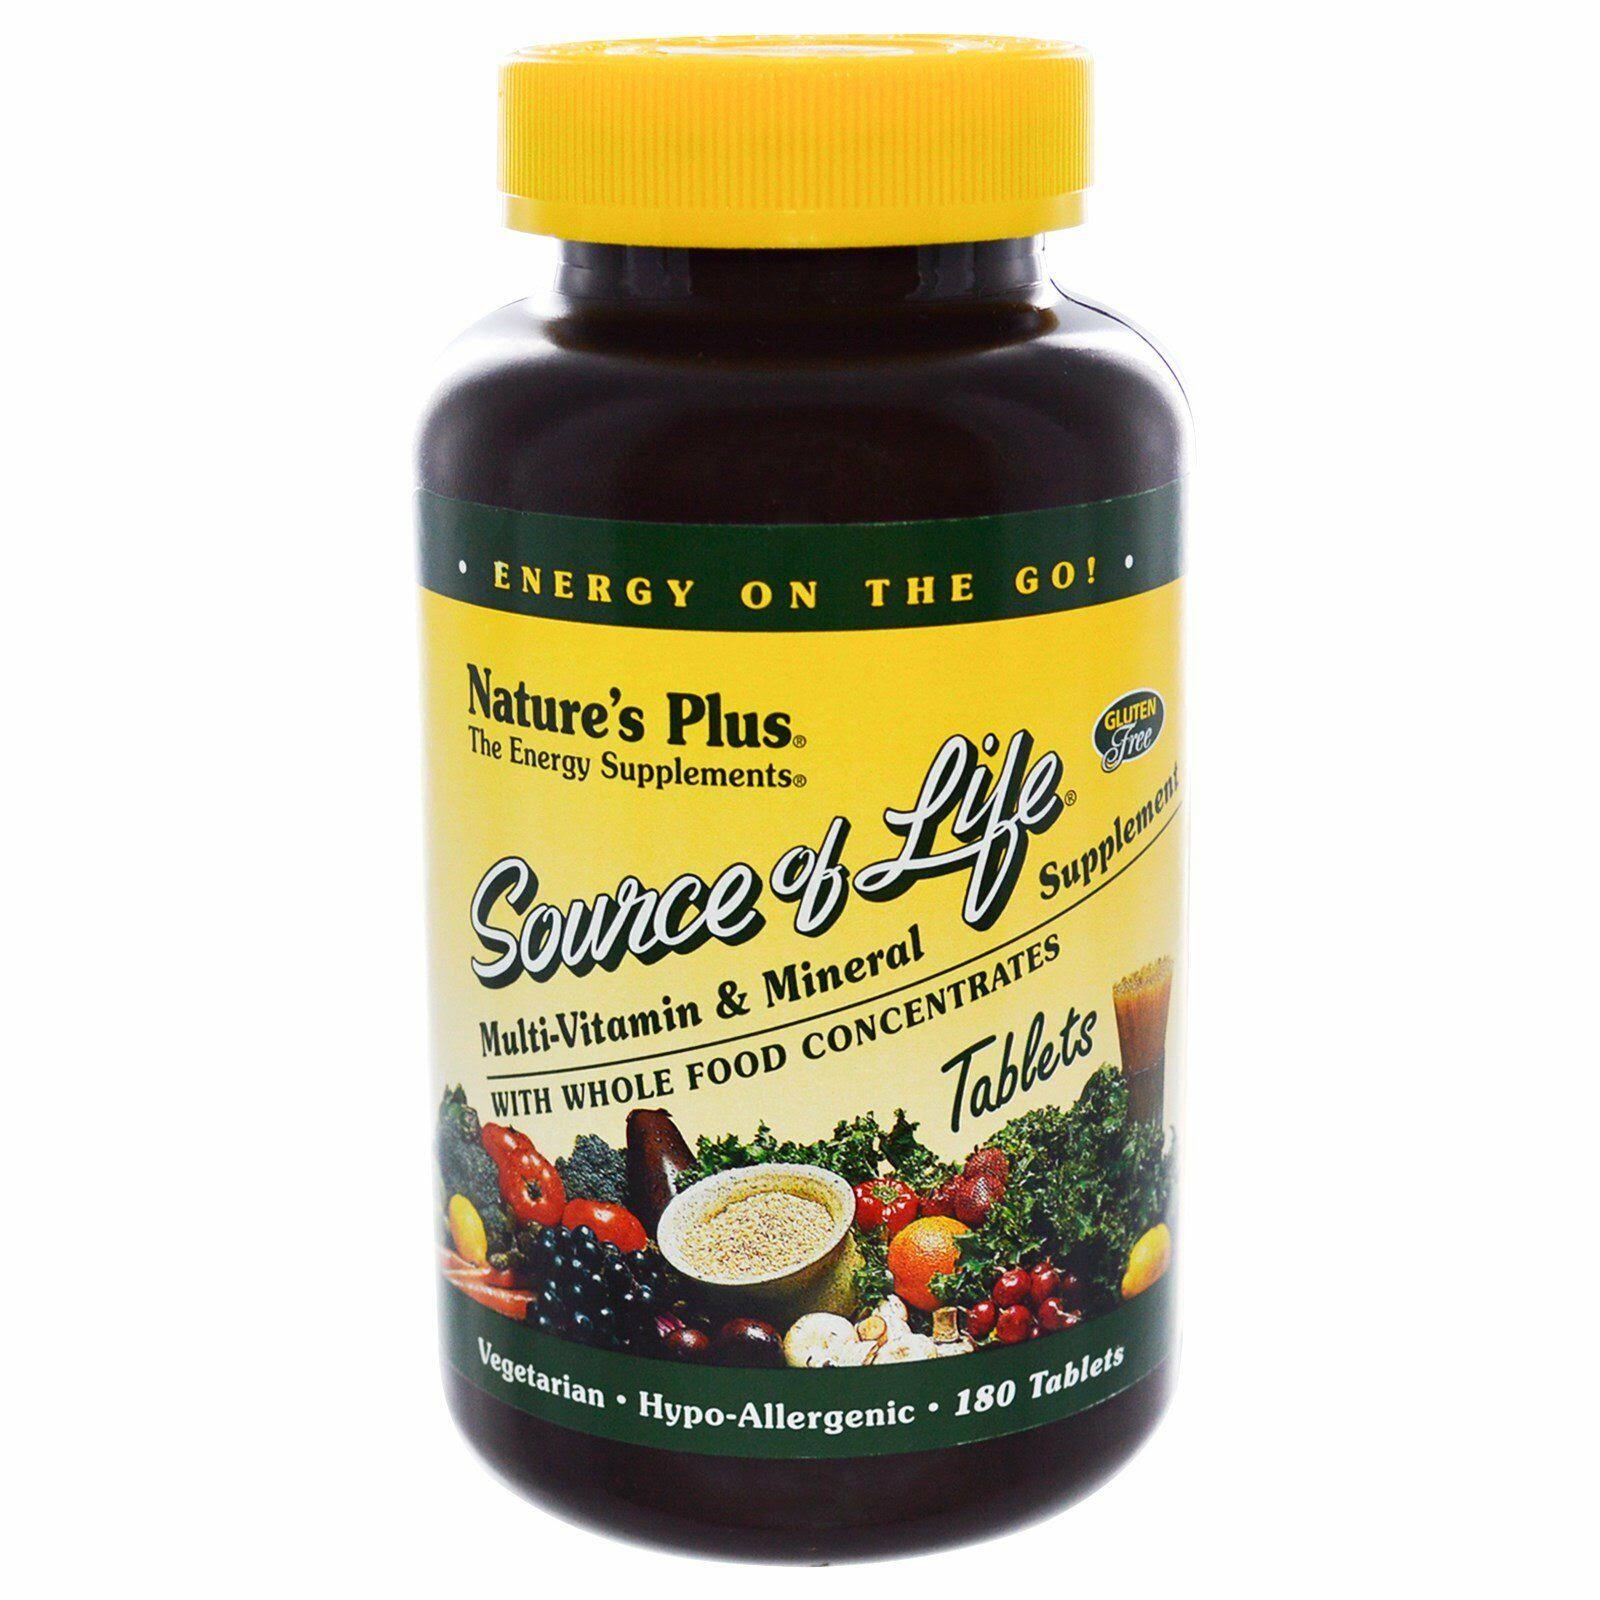 Nature's Plus Source of Life Multi-Vitamin & Mineral Supplement - 180 tablets